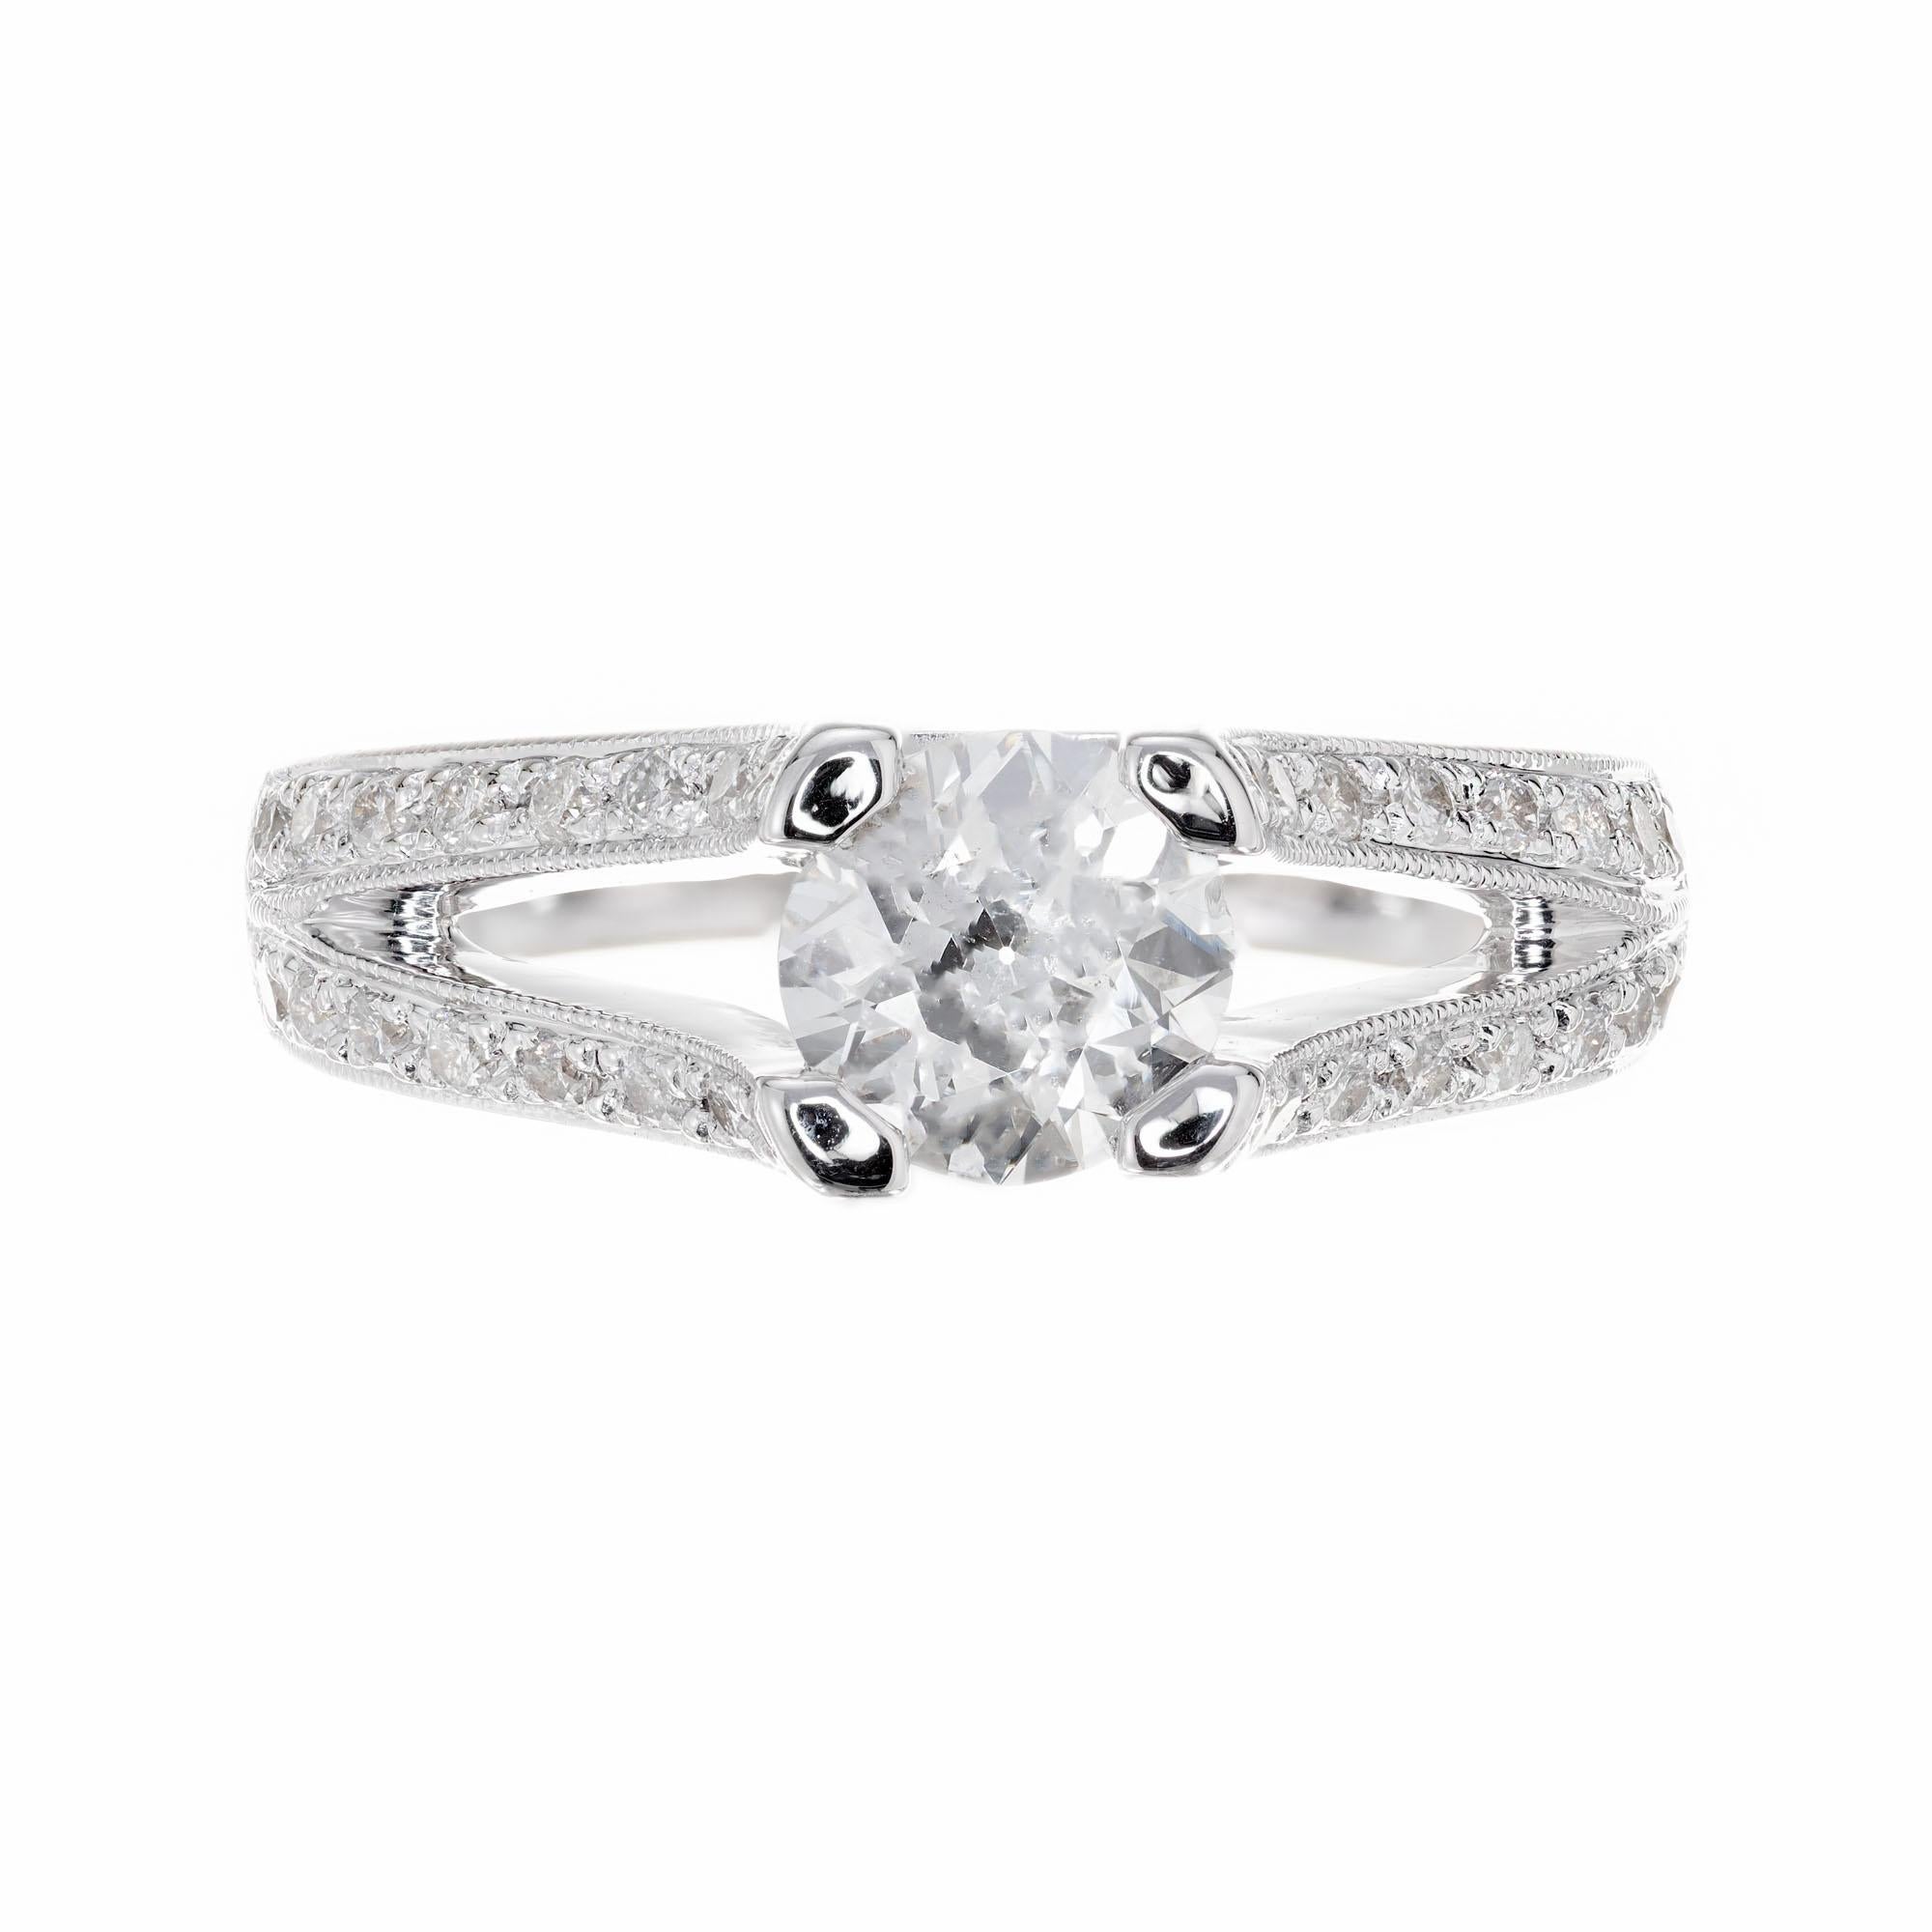 Diamond engagement ring. EGL certified transitional cut center stone with 32 round cut accent diamonds along the split shank 18k white gold setting. The diamond circa 1930-1940, the setting was recently created for this stone. 

1 transitional cut